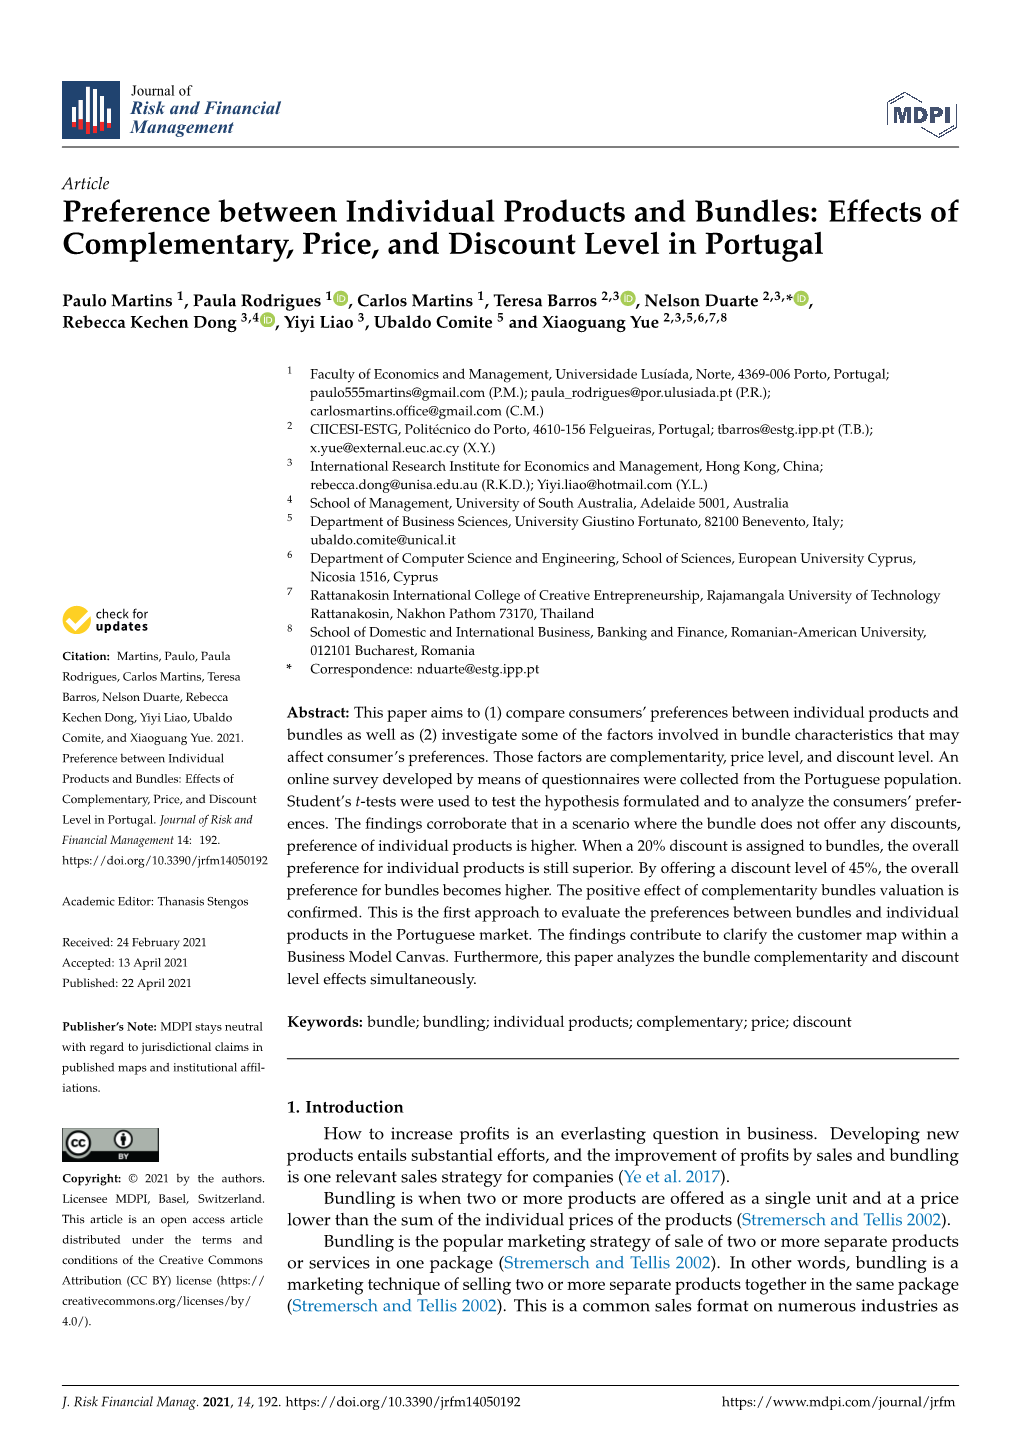 Preference Between Individual Products and Bundles: Effects of Complementary, Price, and Discount Level in Portugal